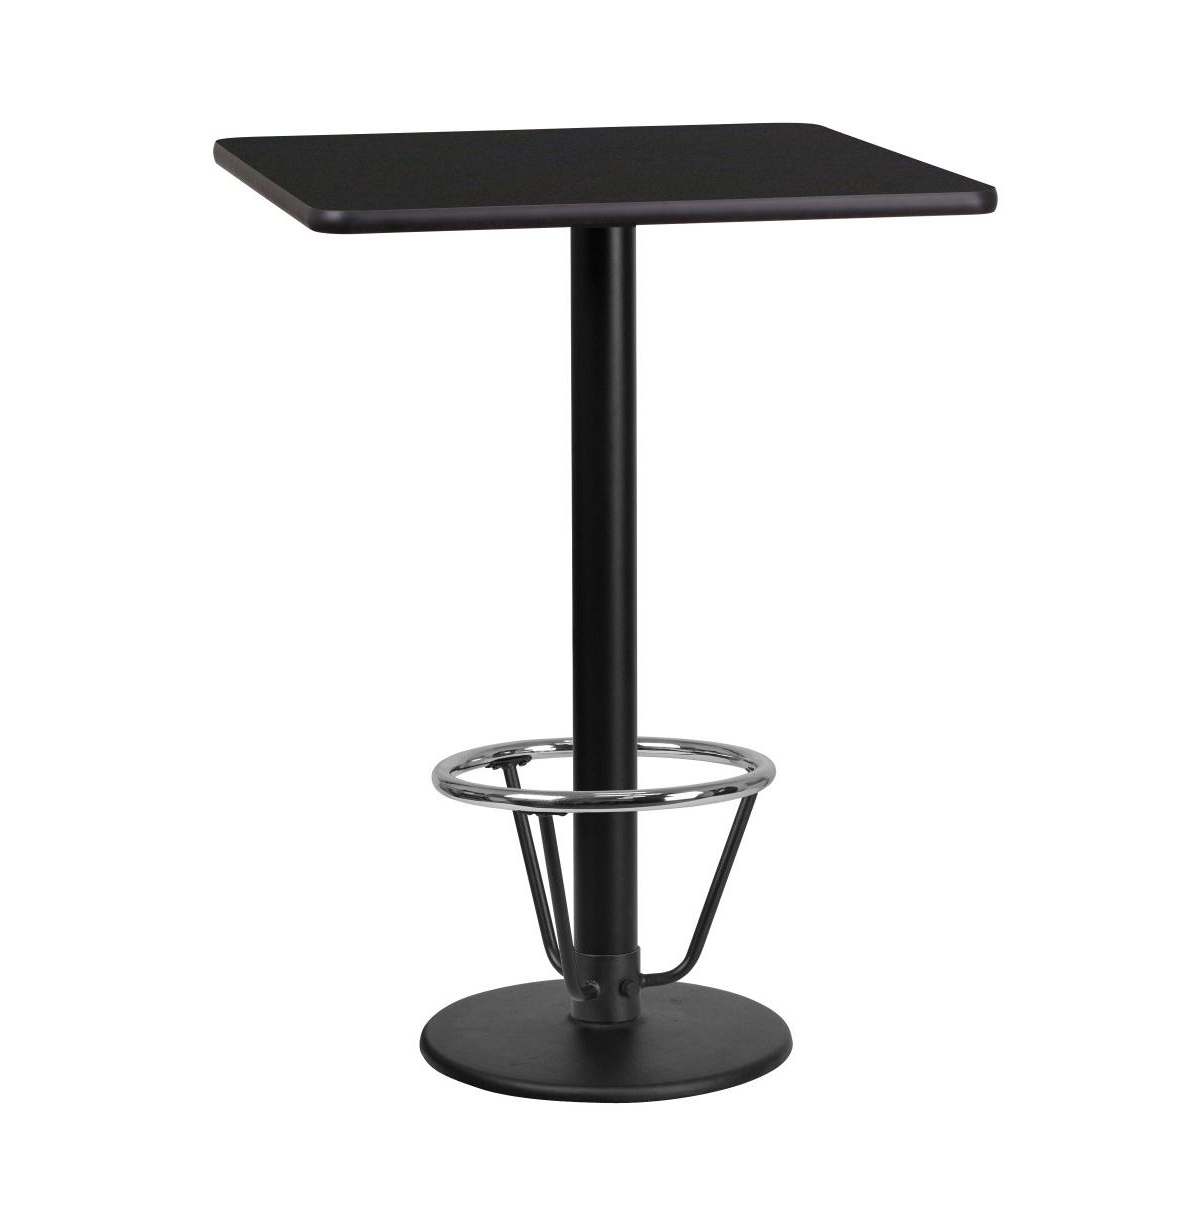 Emma+oliver 24" Square Laminate Bar Table With 18" Round Foot Ring Base In Black